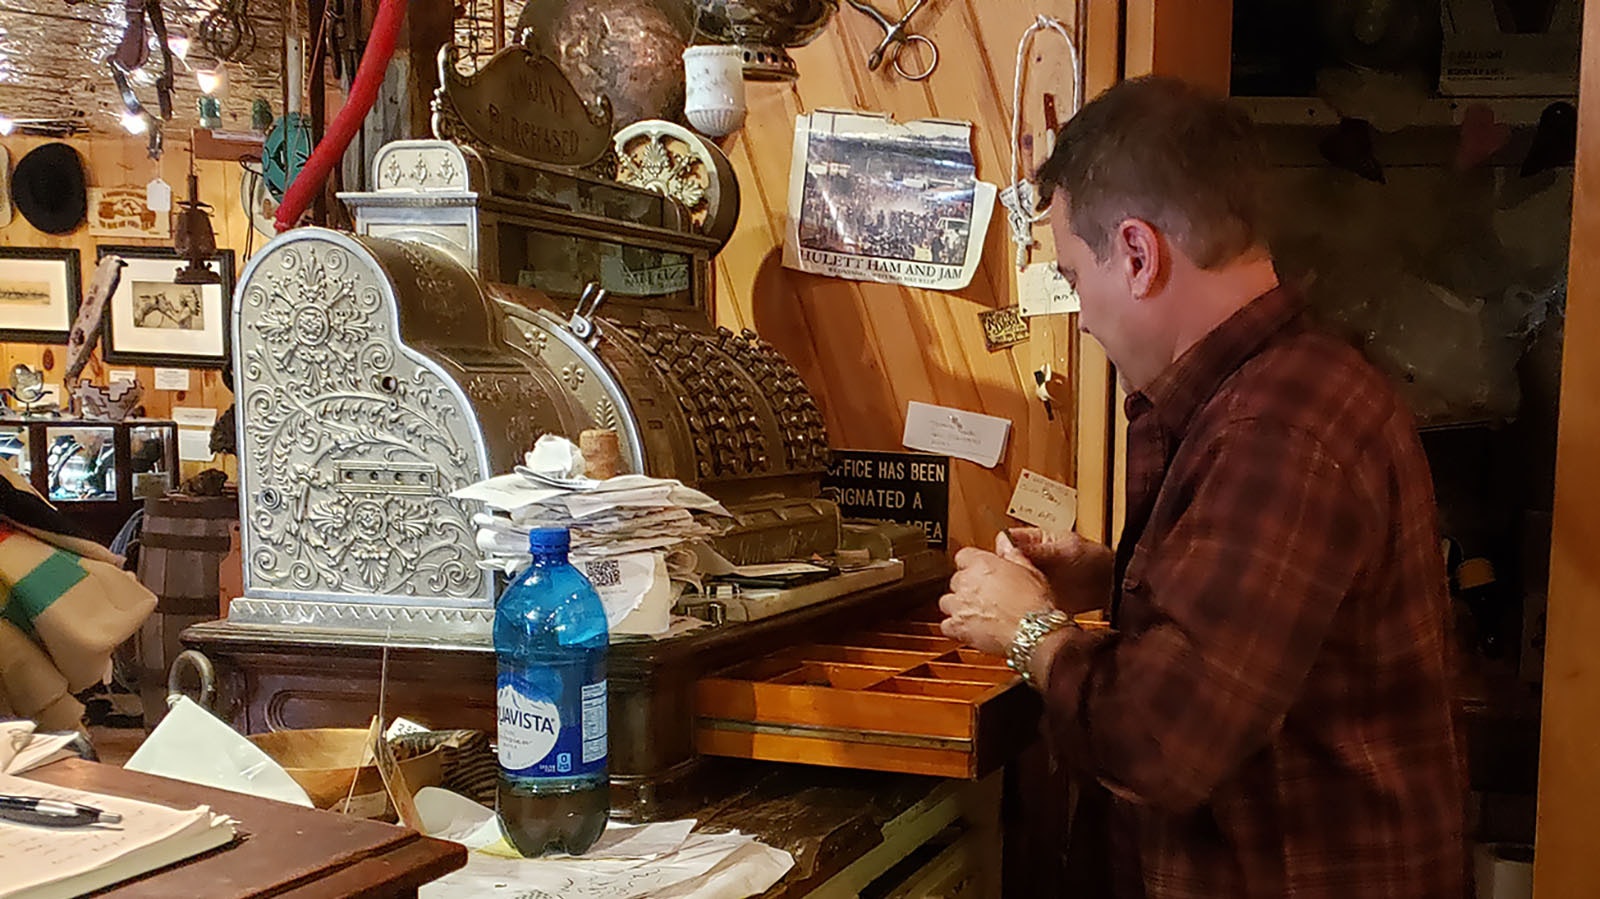 Bob Coronato uses an old fashioned cash register at his store.